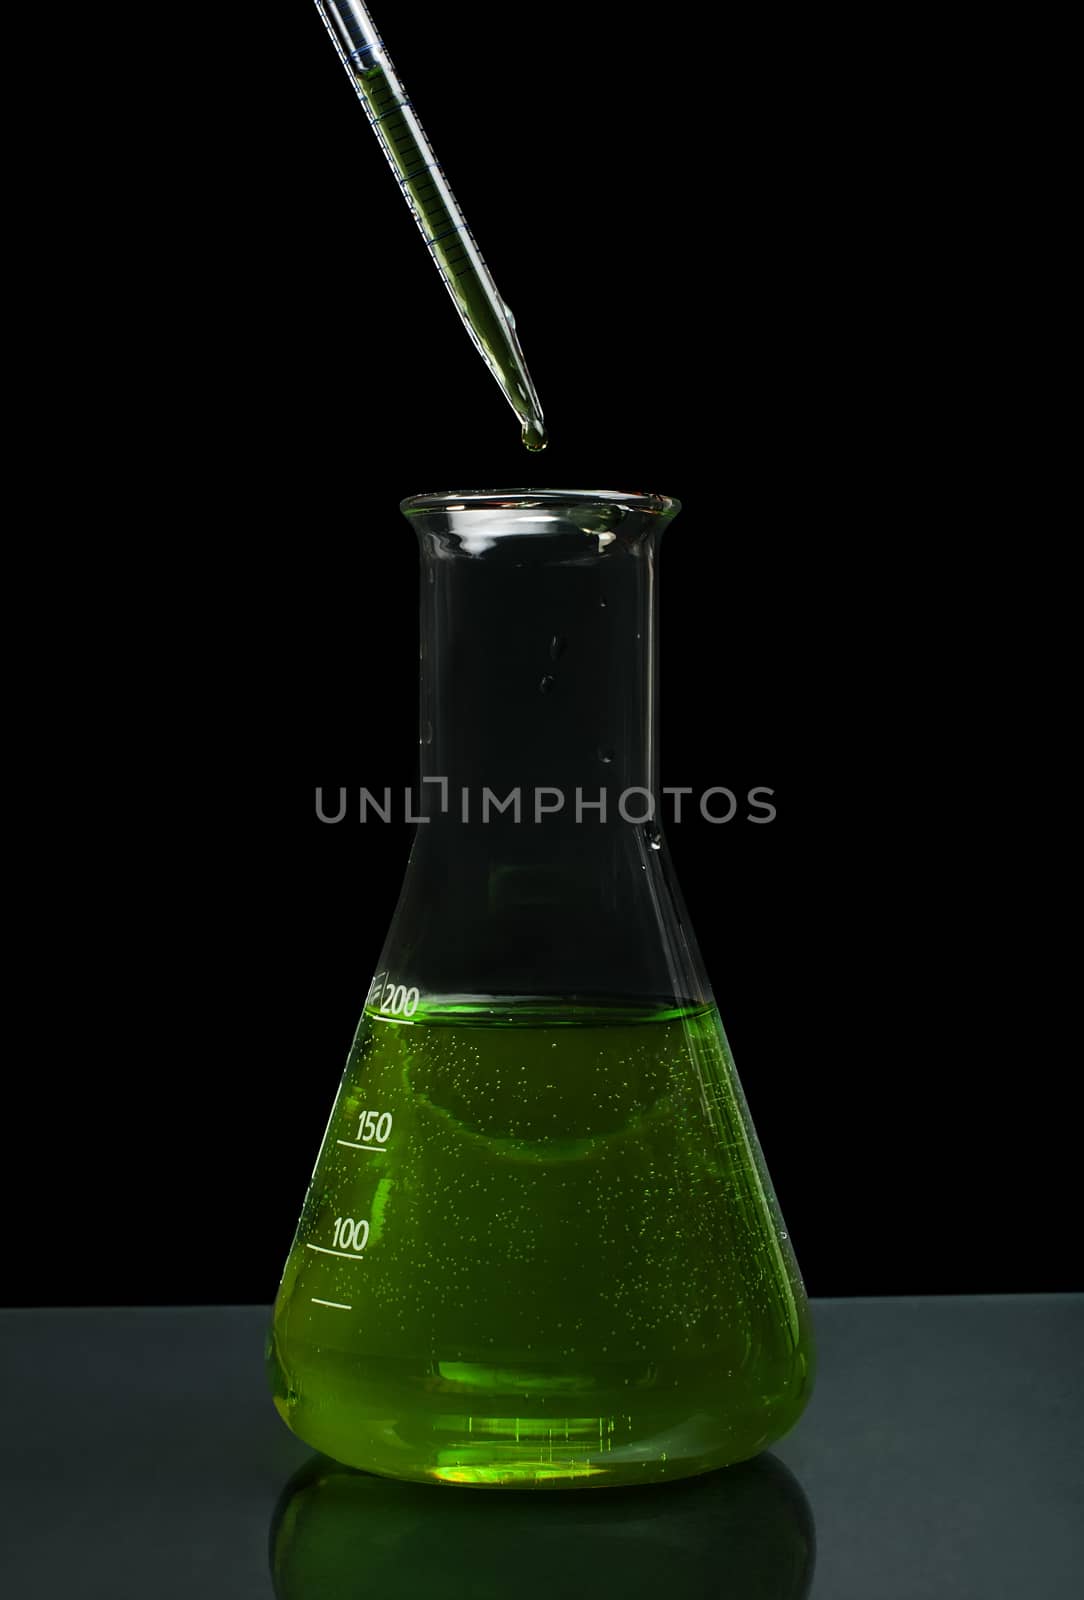 Laboratory beaker filled with green color liquid substances and laboratory pipette. Dark background